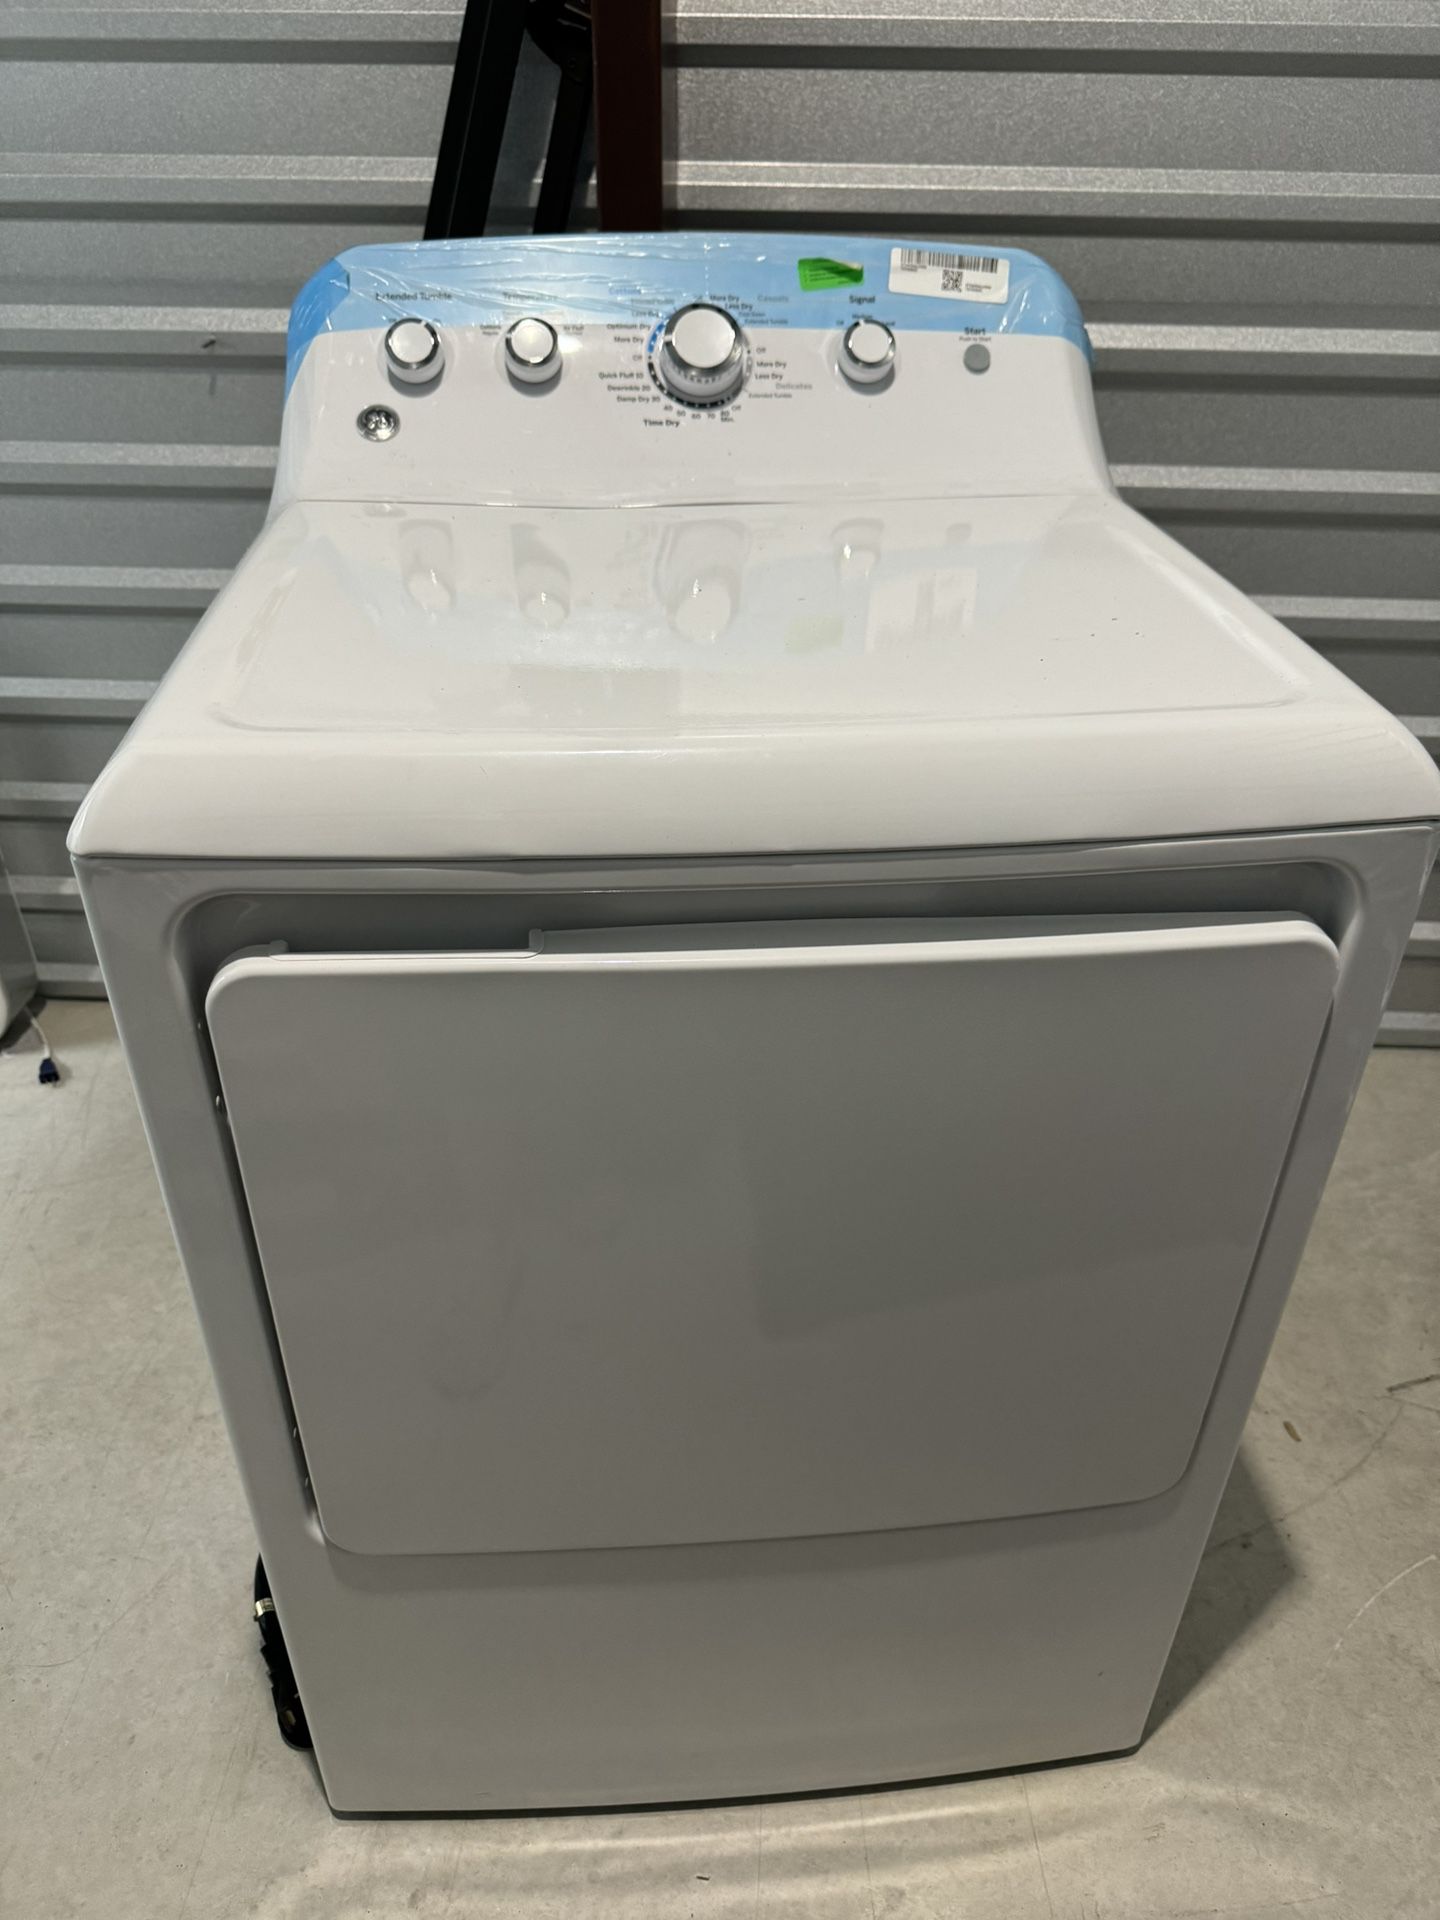 GE washer & dryer like new